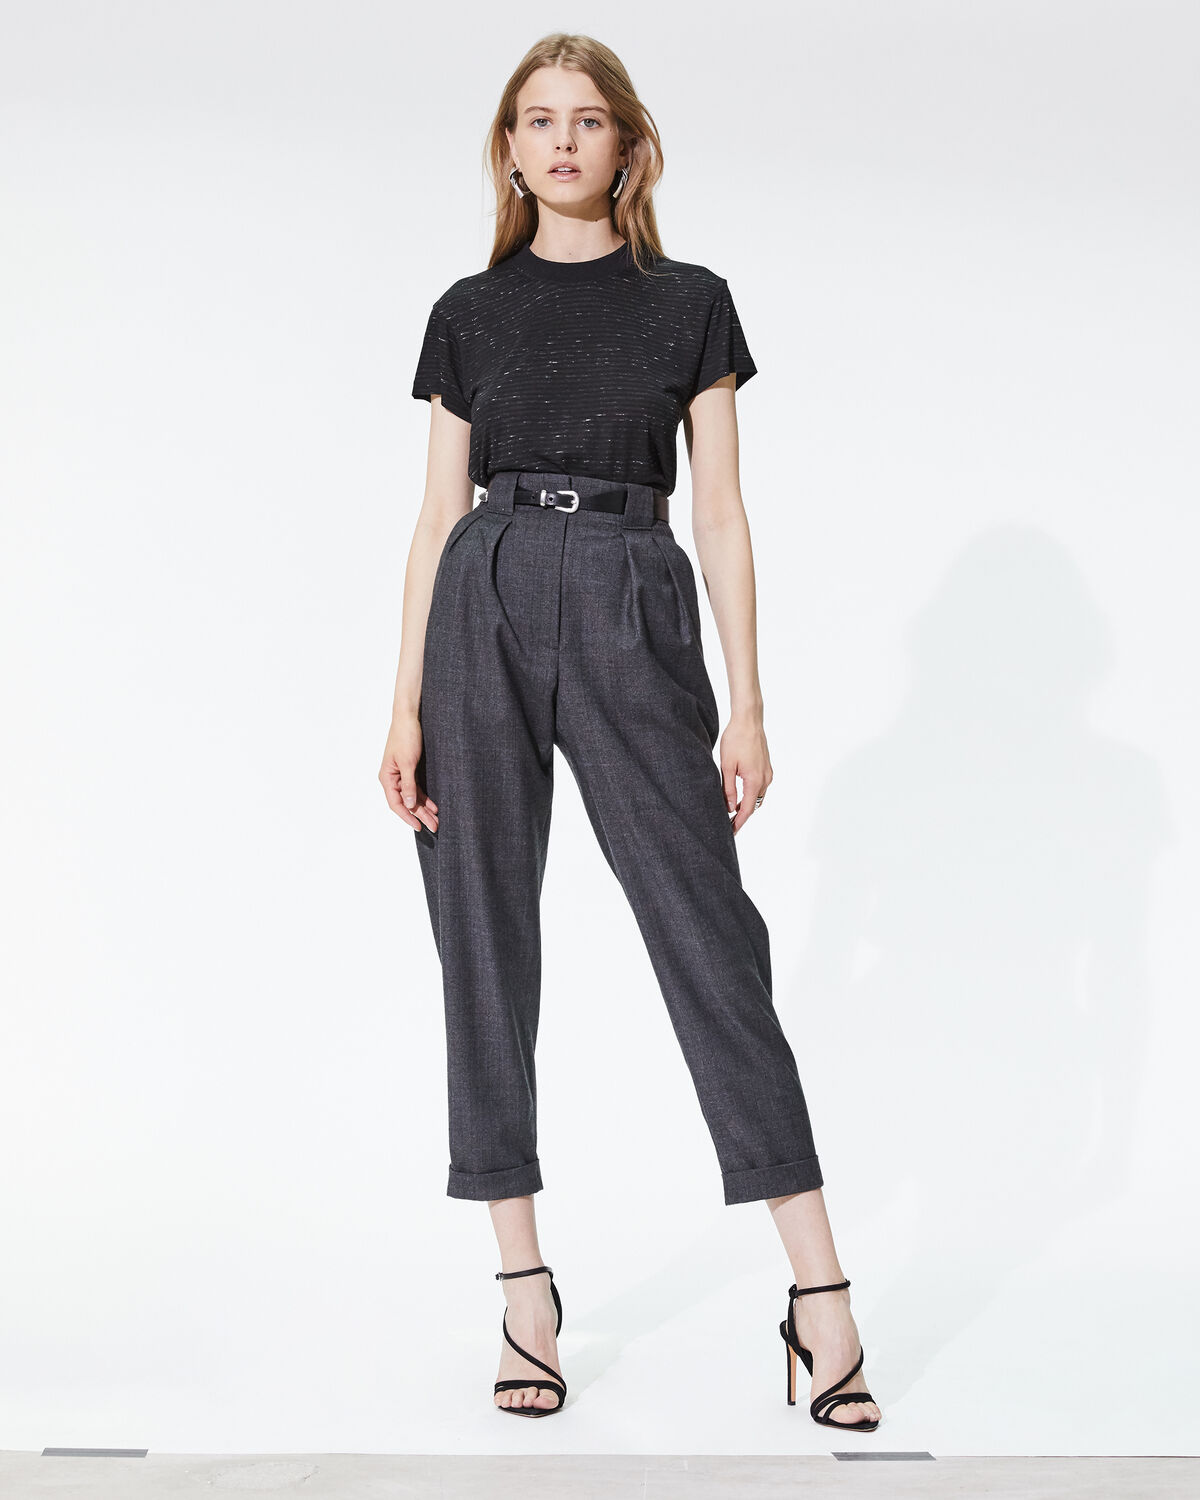 Nux Trousers Anthracite by IRO Paris